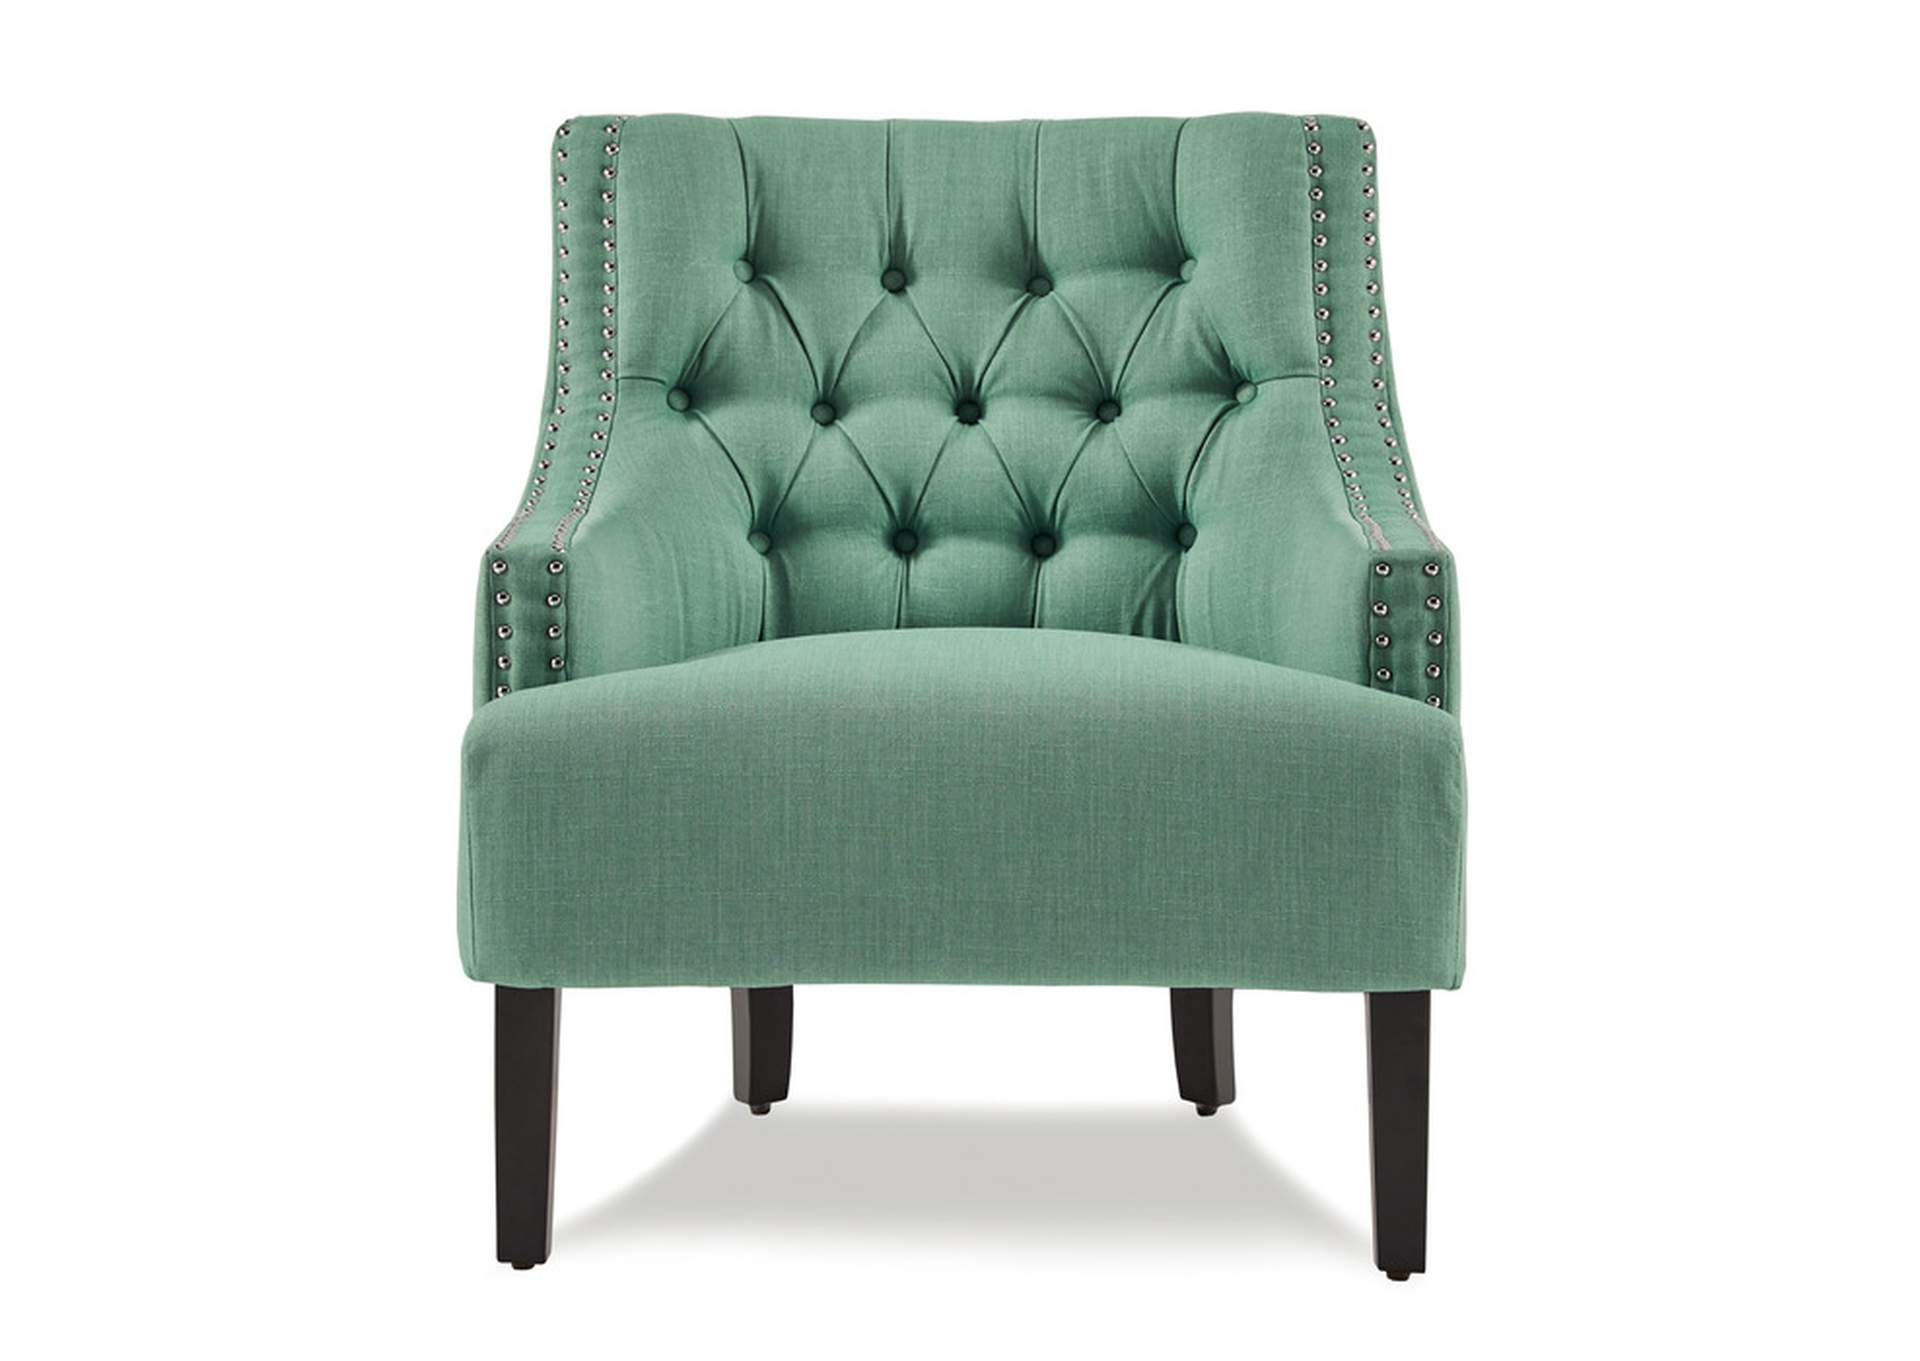 Charisma Accent Chair,Homelegance